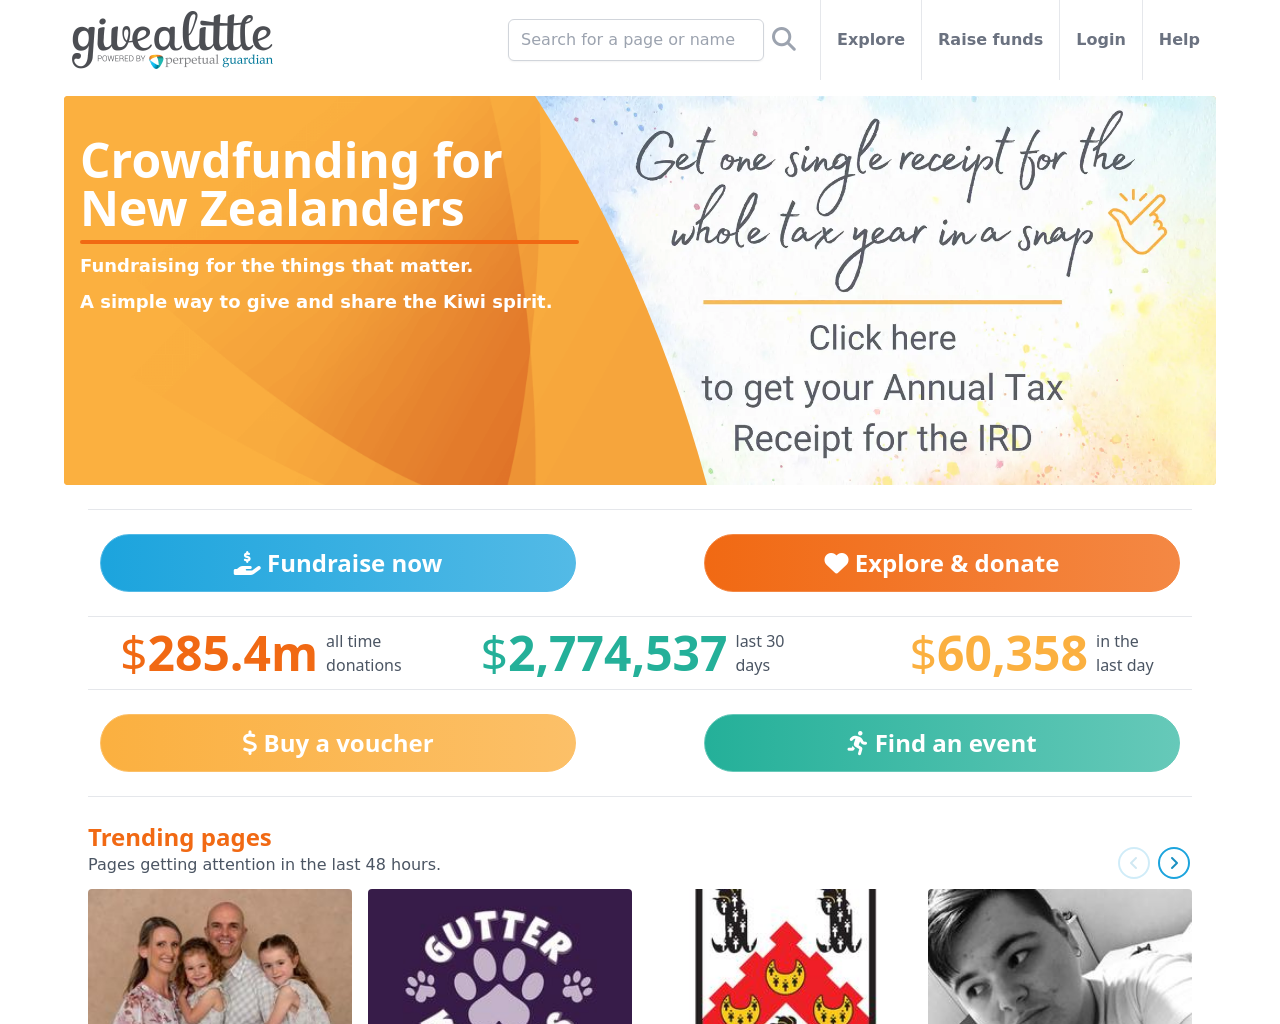 givealittle.co.nz